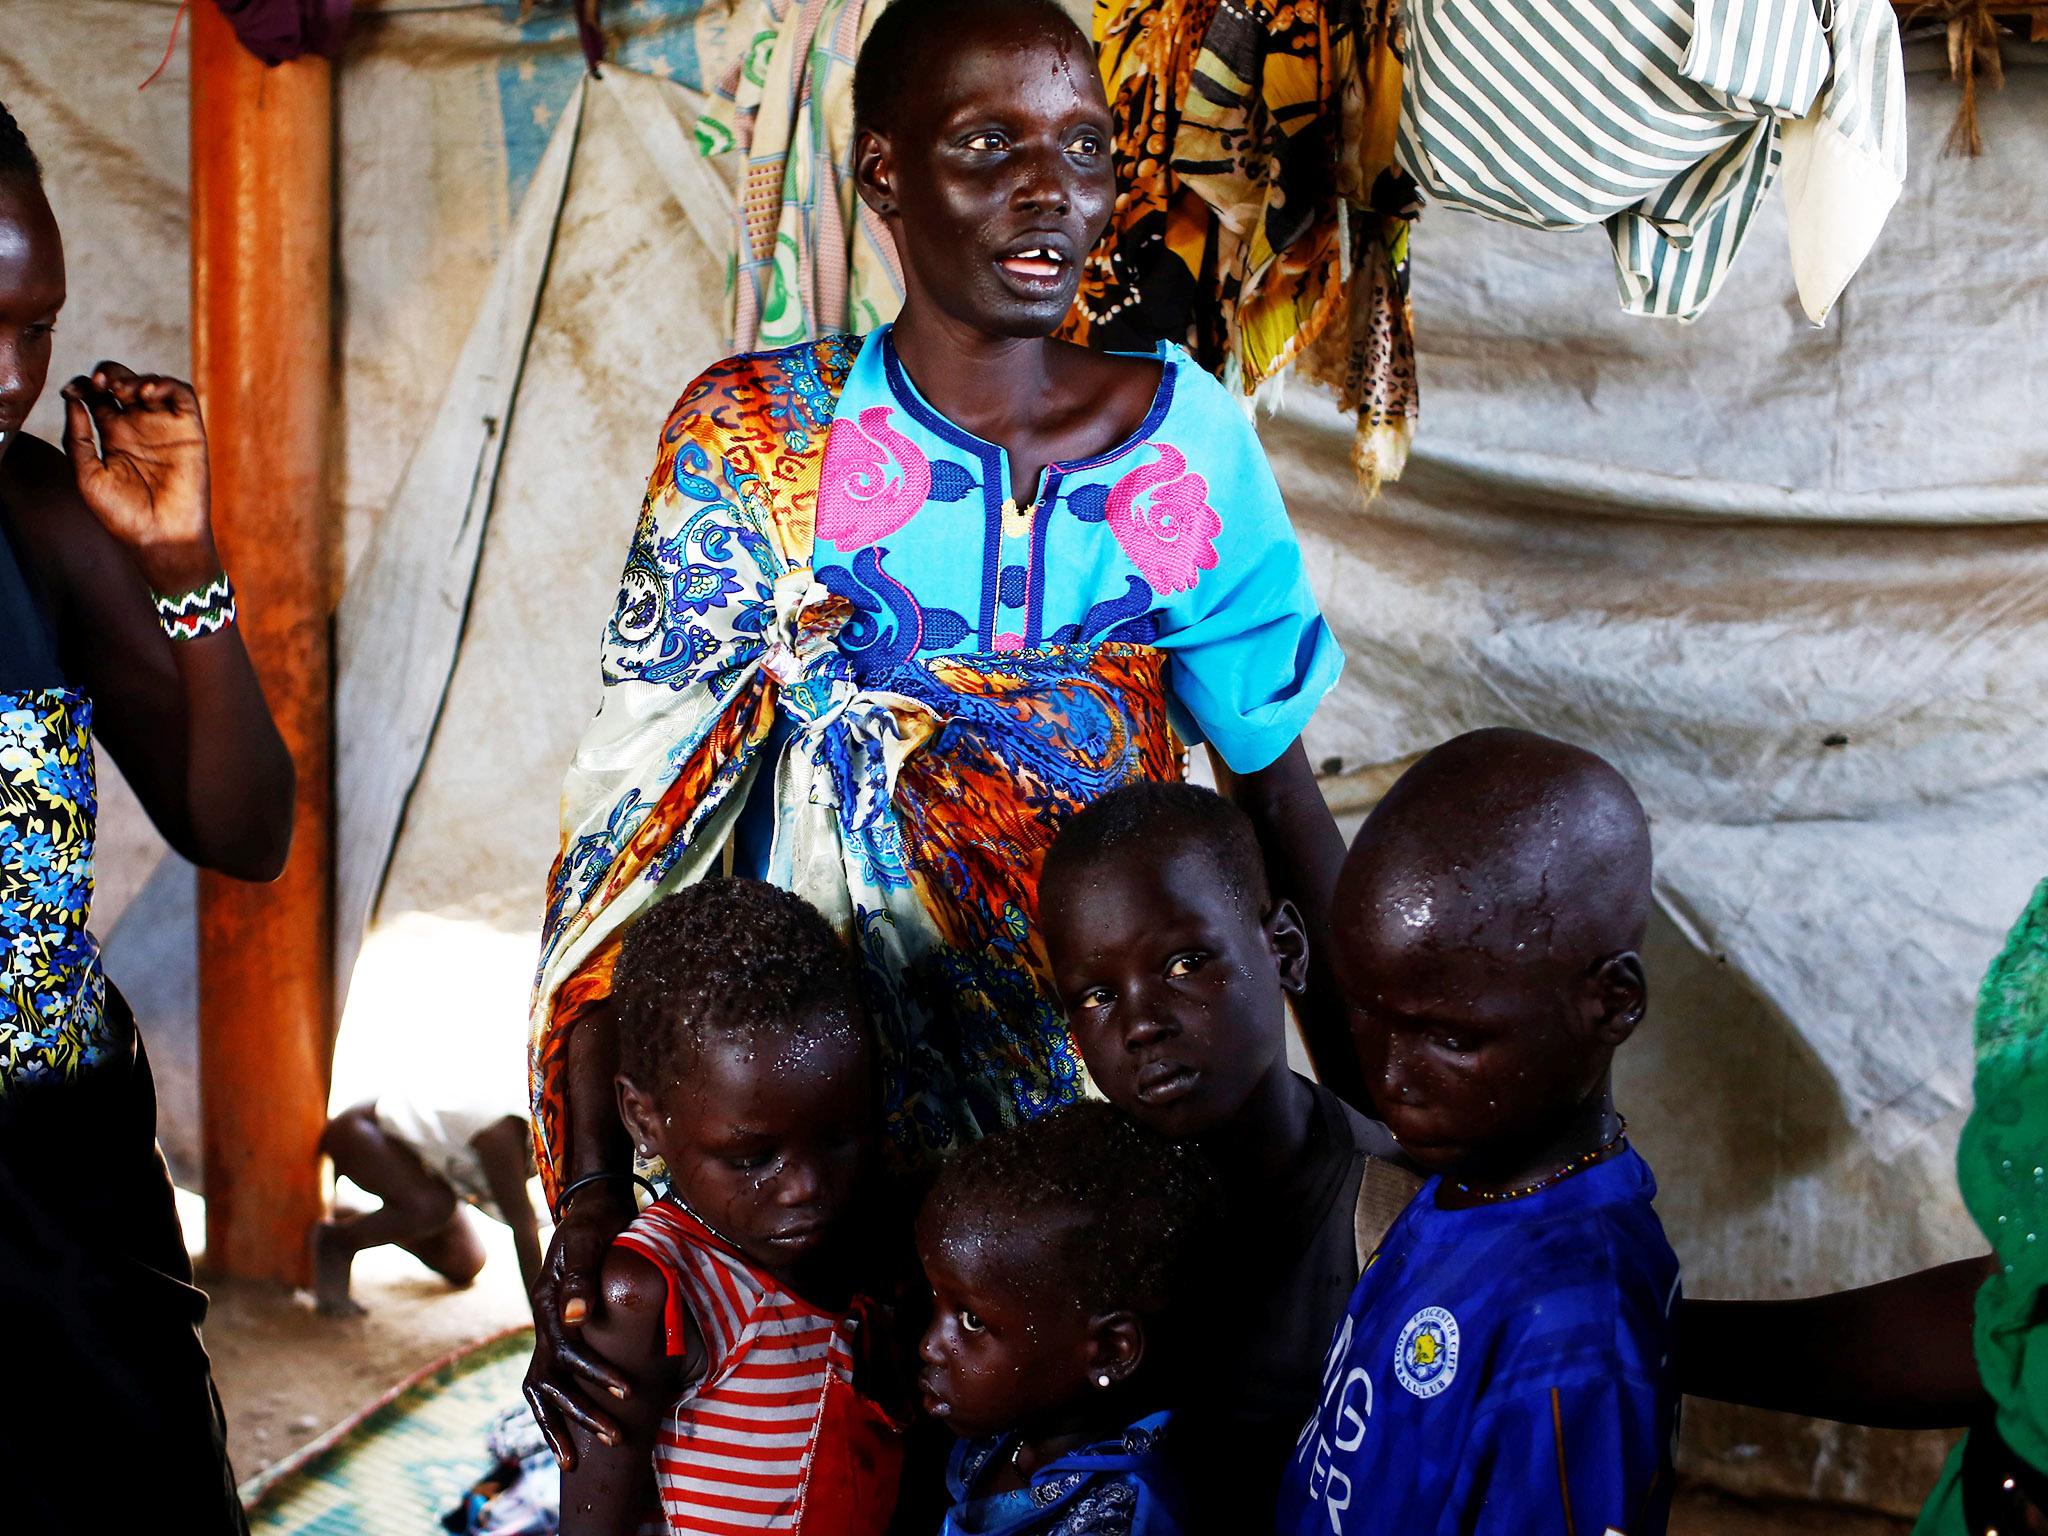 Nyagonga Machul, 38, embraces her children after being reunited at the United Nations mission in South Sudan